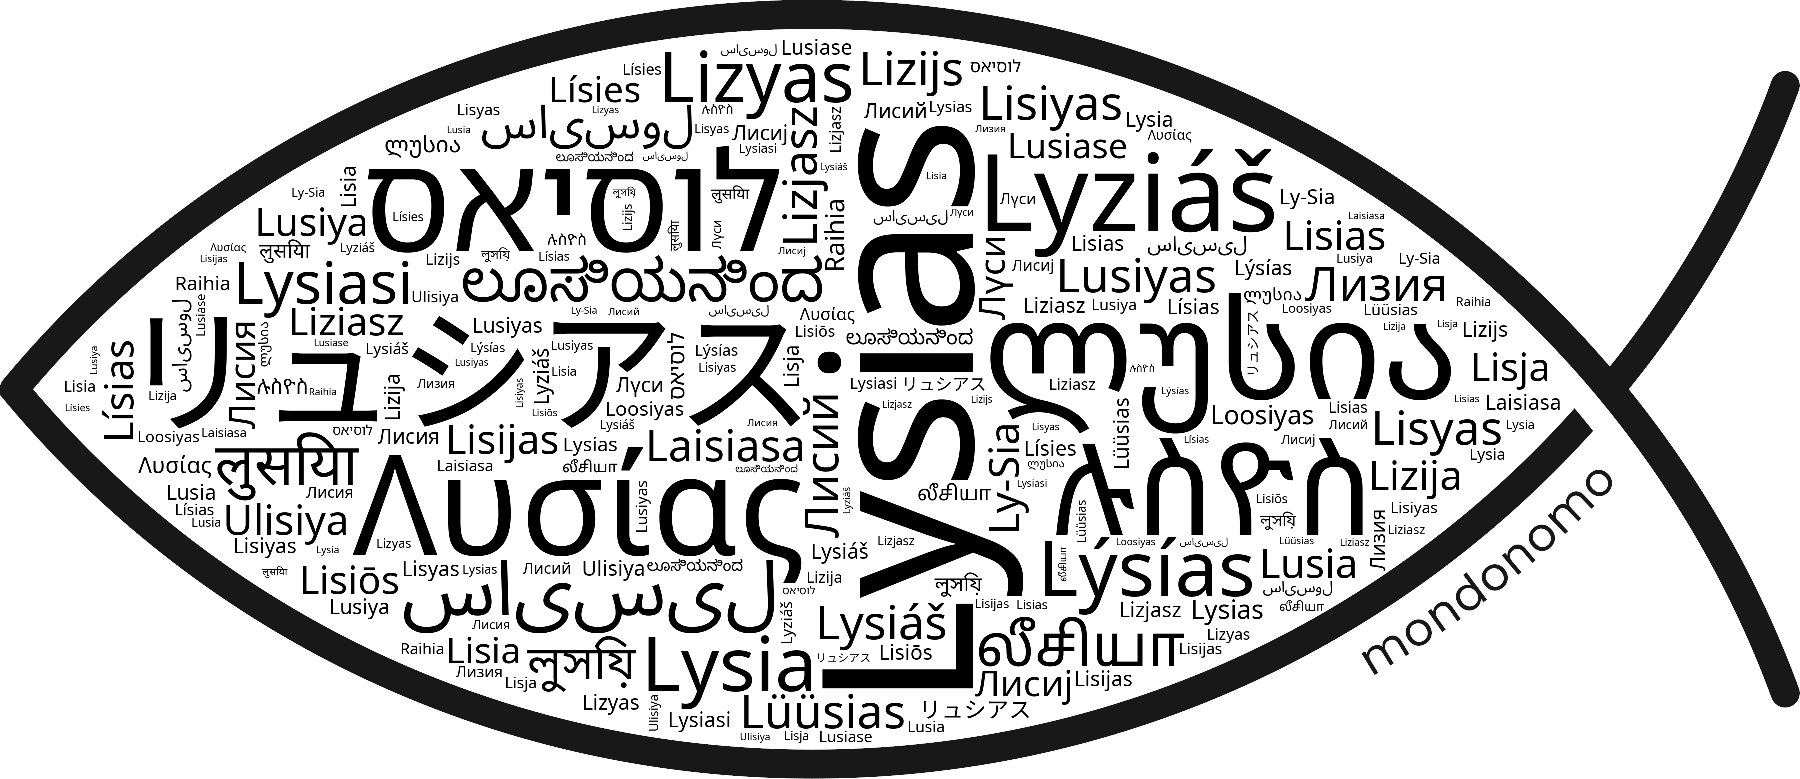 Name Lysias in the world's Bibles